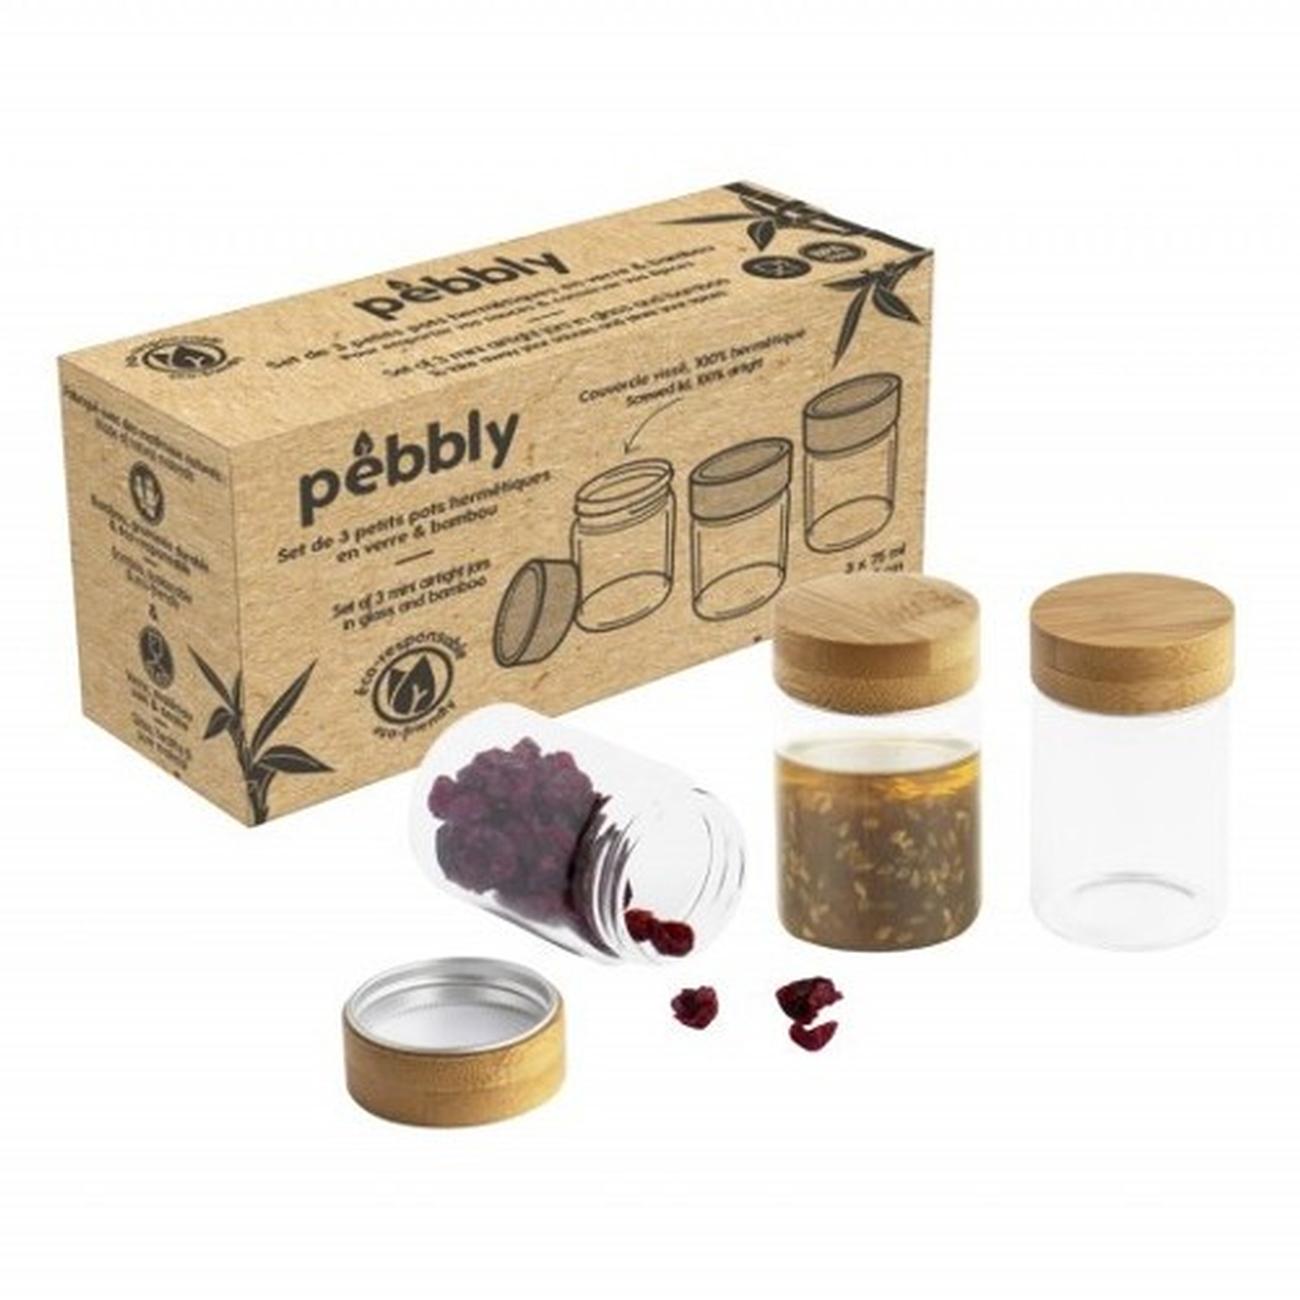 https://www.thekitchenwhisk.ie/contentfiles/productImages/Large/1637586758883_Round-Glass-Canisters-Screw-Bamboo-Lid-75ml-set-of-3-Pebbly-1.jpg